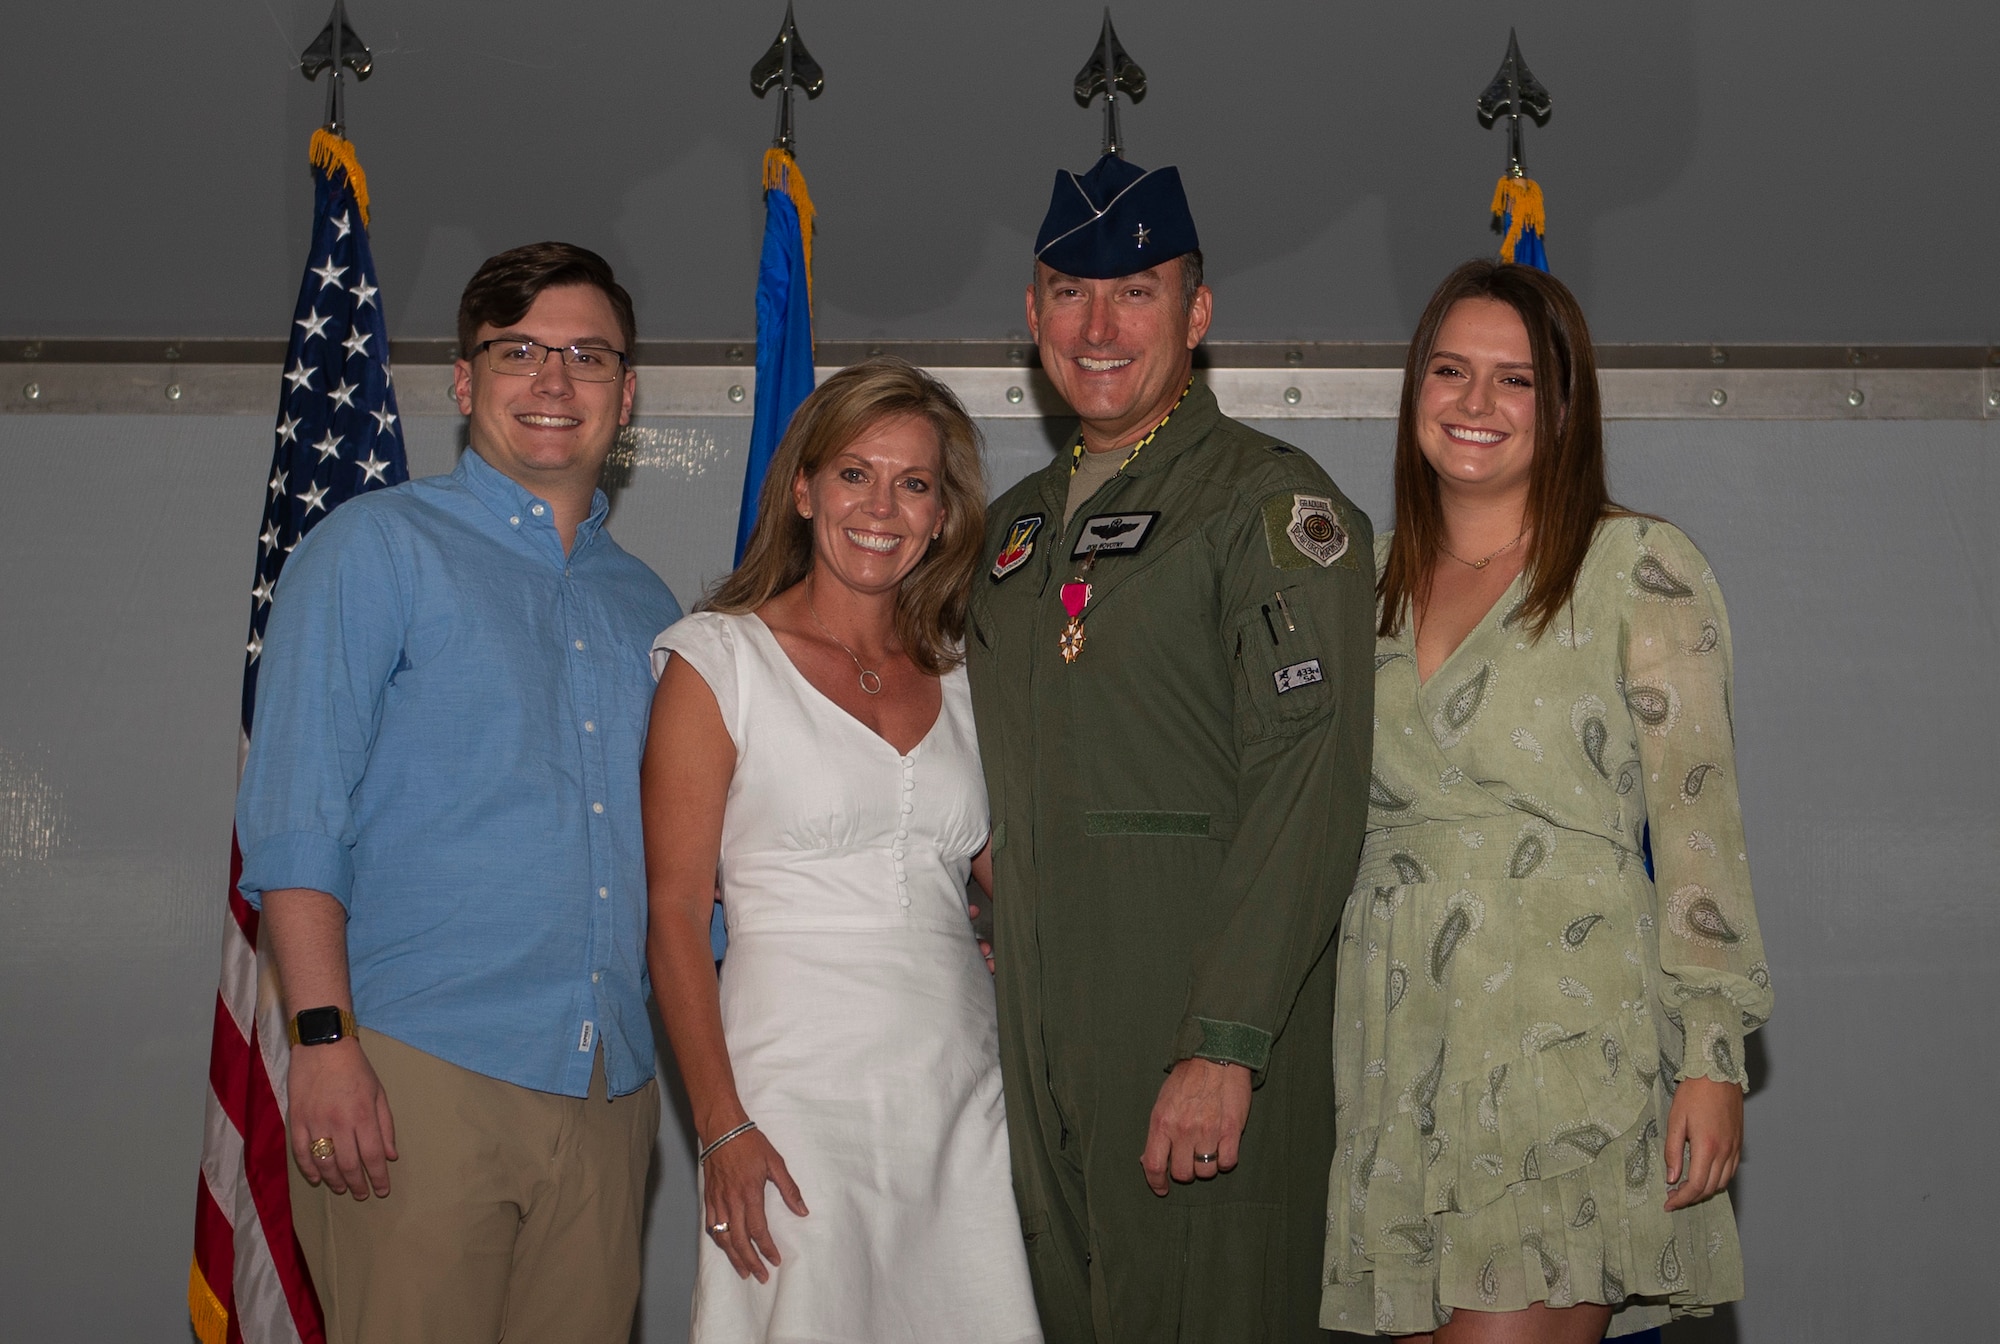 Brig. Gen. Robert Novotny smiles at the camera while surrounded by his wife and two children on stage during a ceremony.